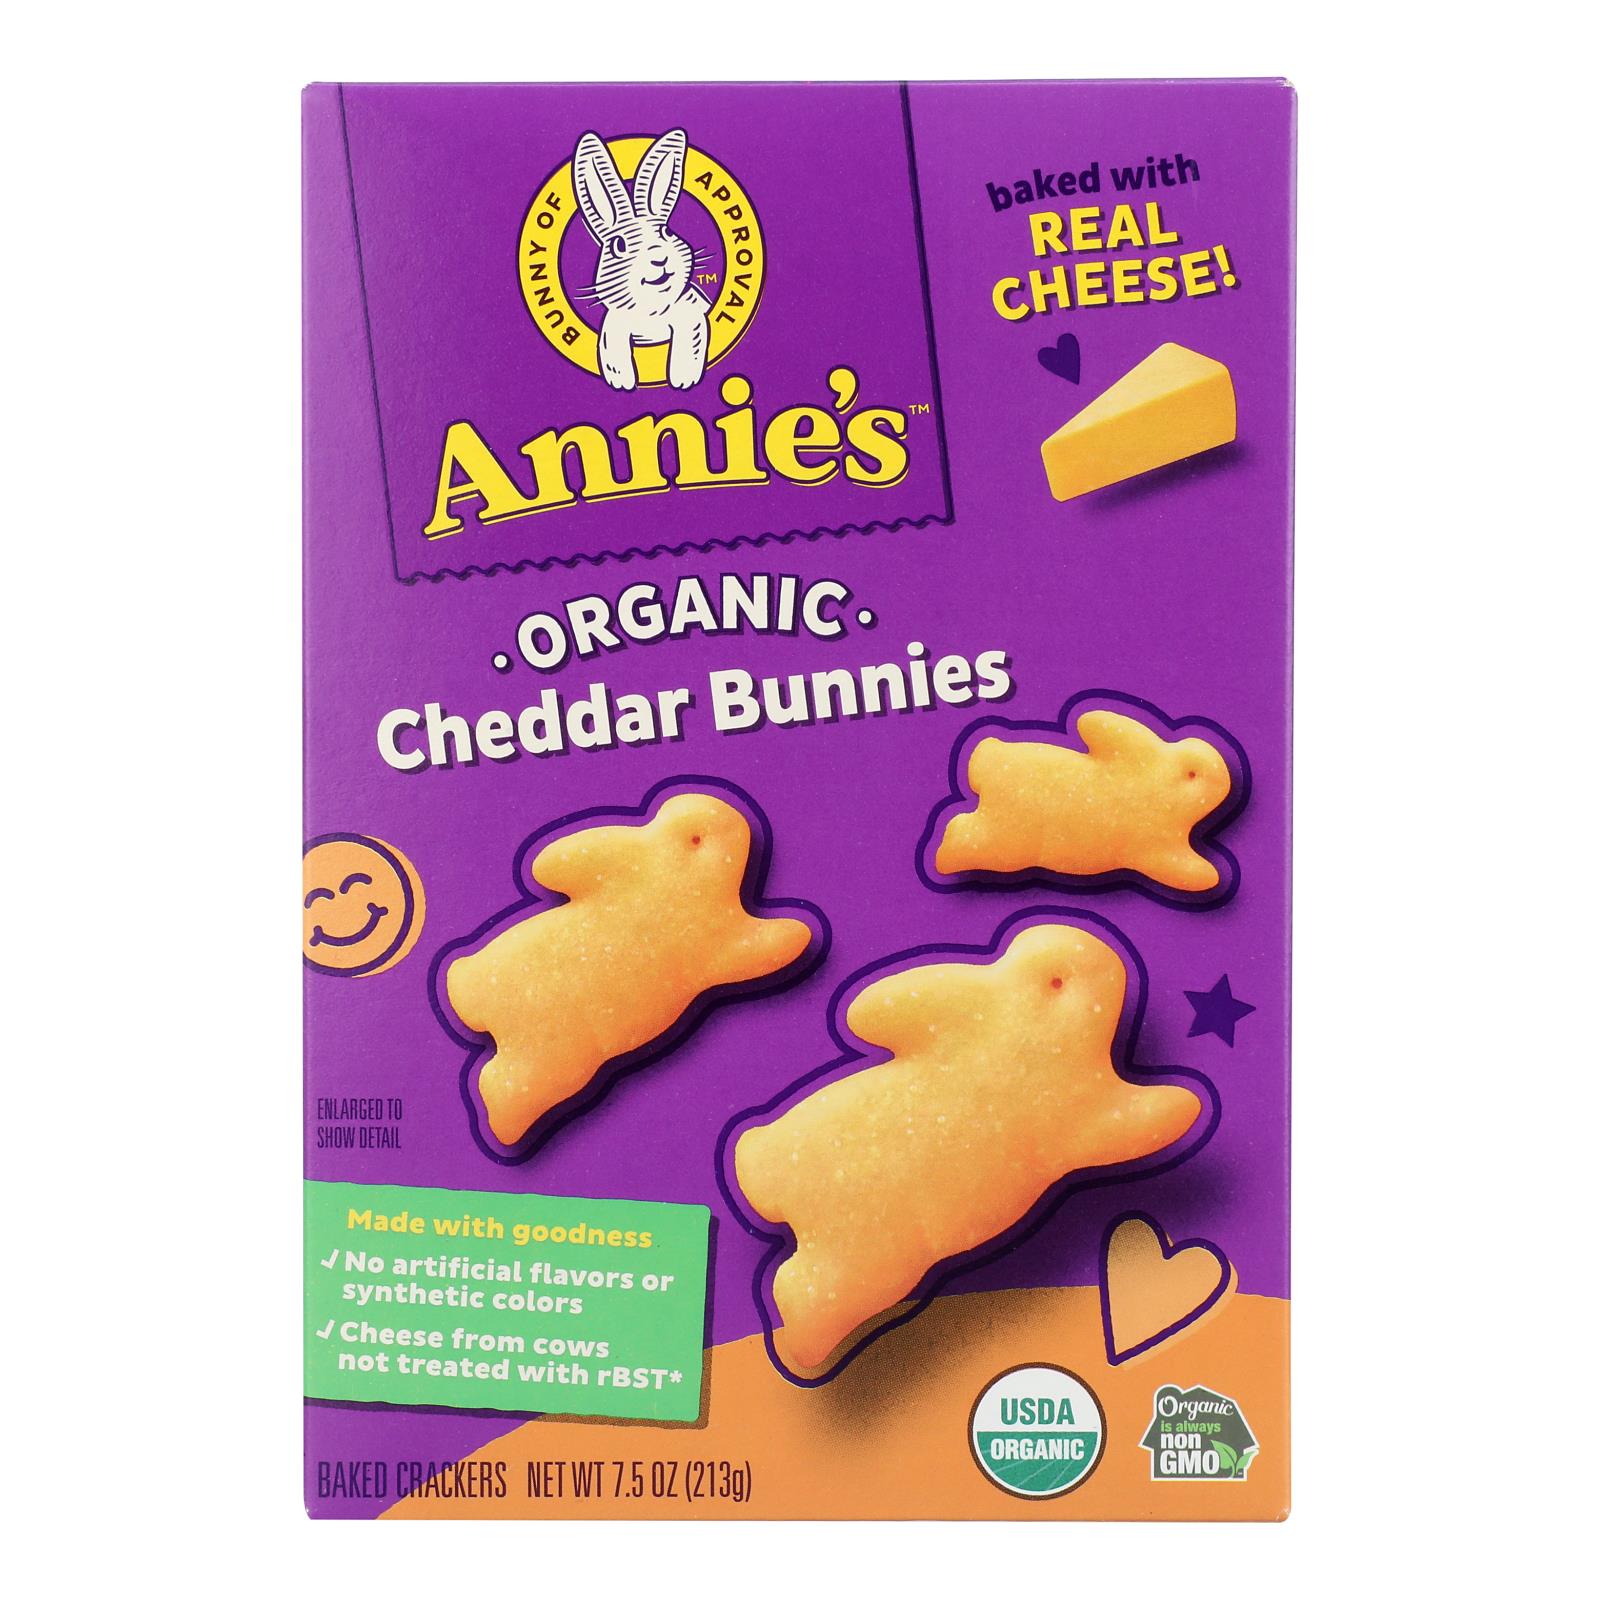 Annie's Homegrown - Snack Crackr  Ched Bun - Case Of 12-7.5 Oz.